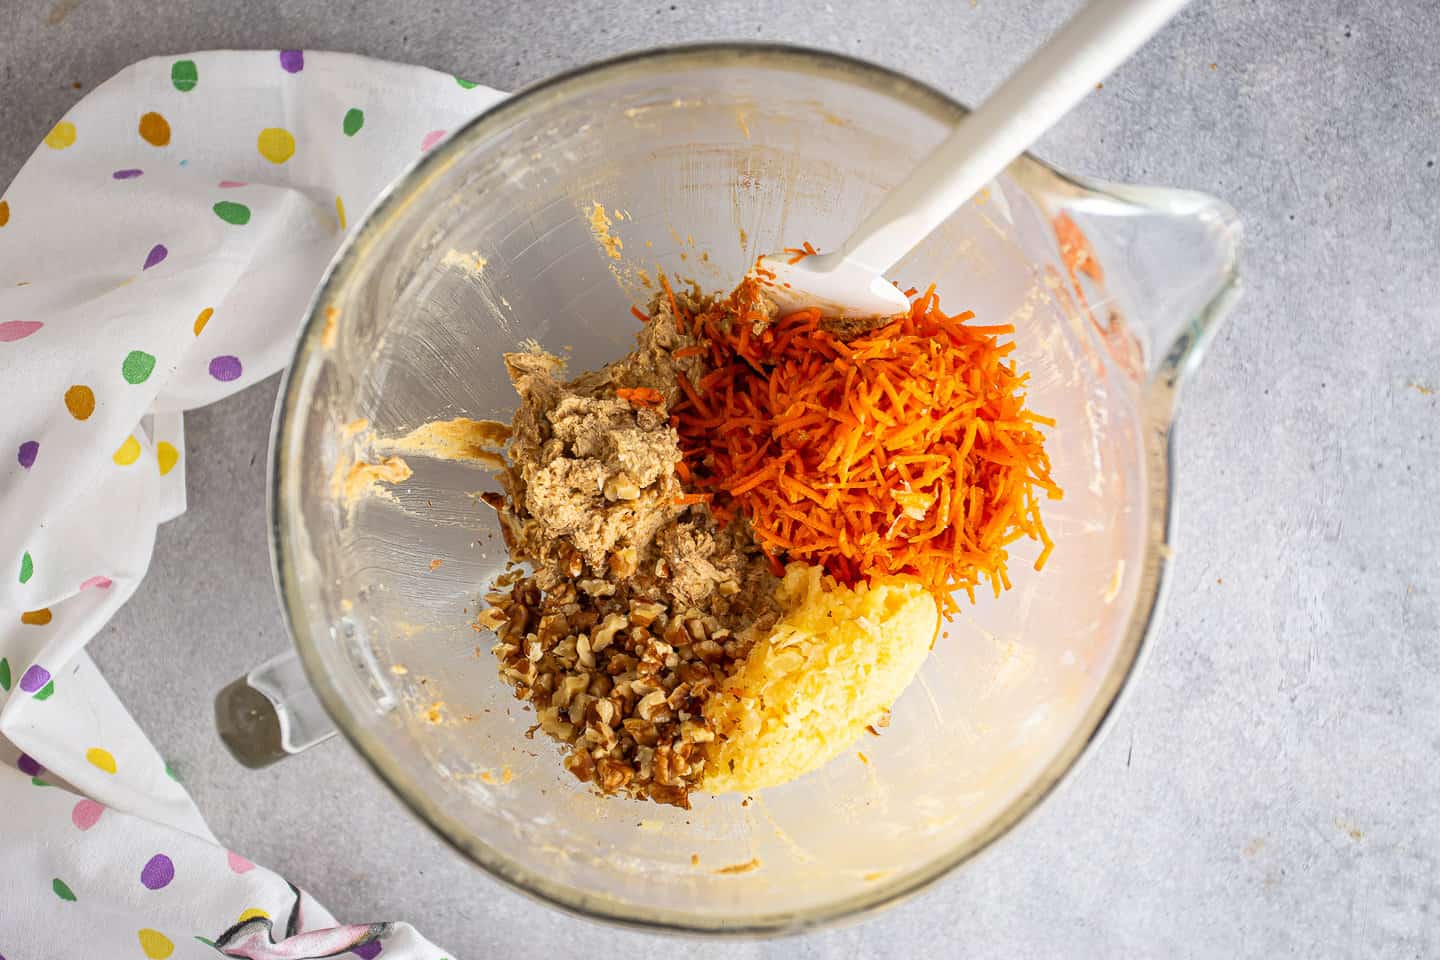 Adding carrots, pineapple, and walnuts to carrot cake batter.